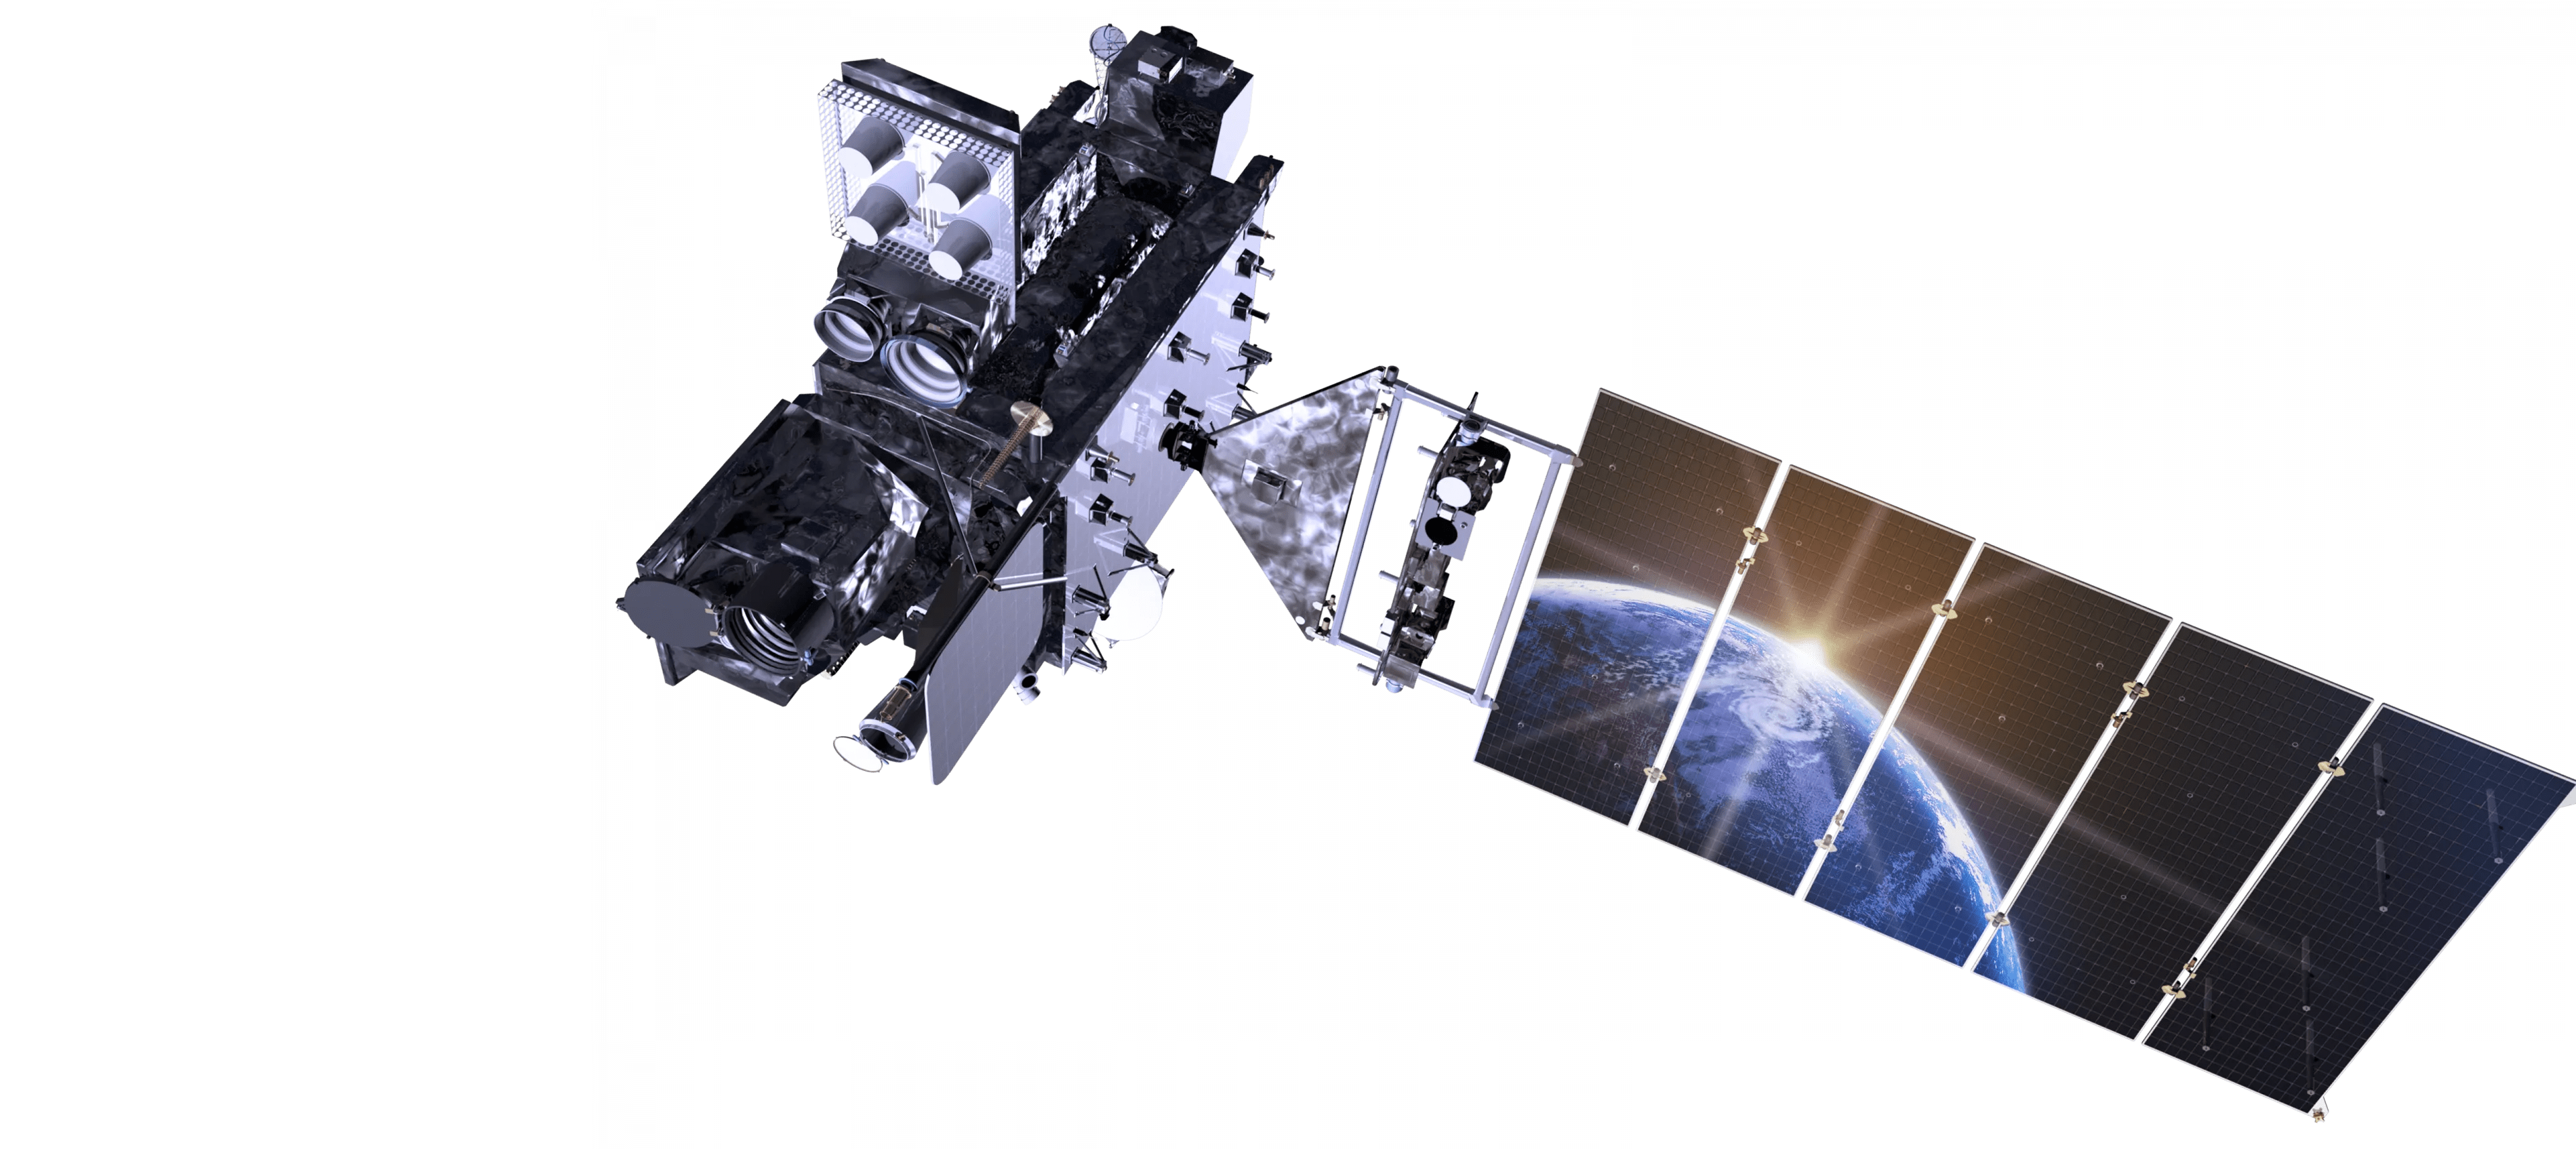 GOES-R series satellite 3d rendering front left side visible with the Earth reflected in it's solar panels.